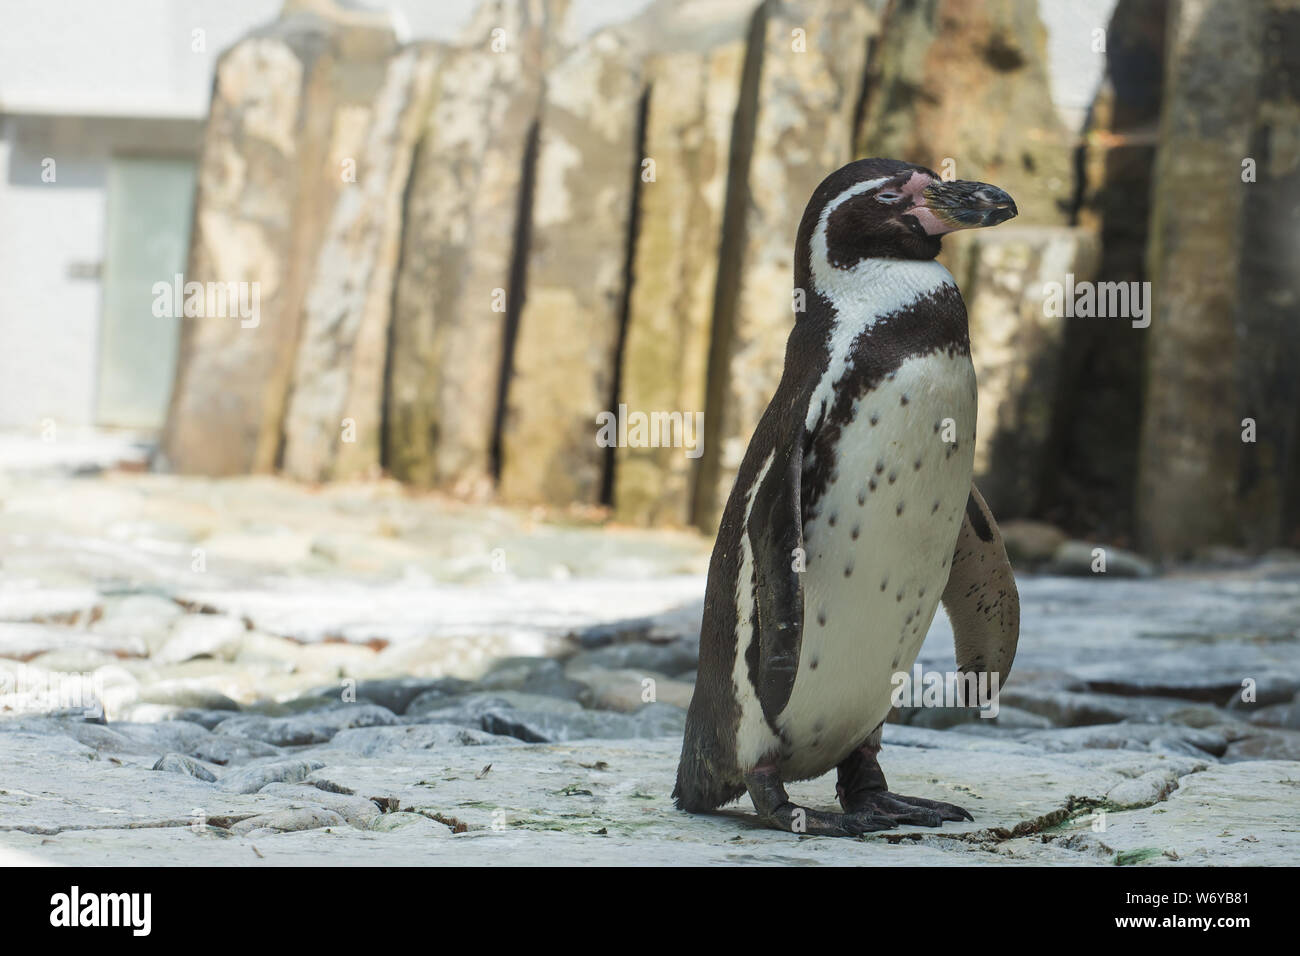 Cute african penguin walking at the zoo. Concept of animal life in a zoo. Animal protection. Stock Photo